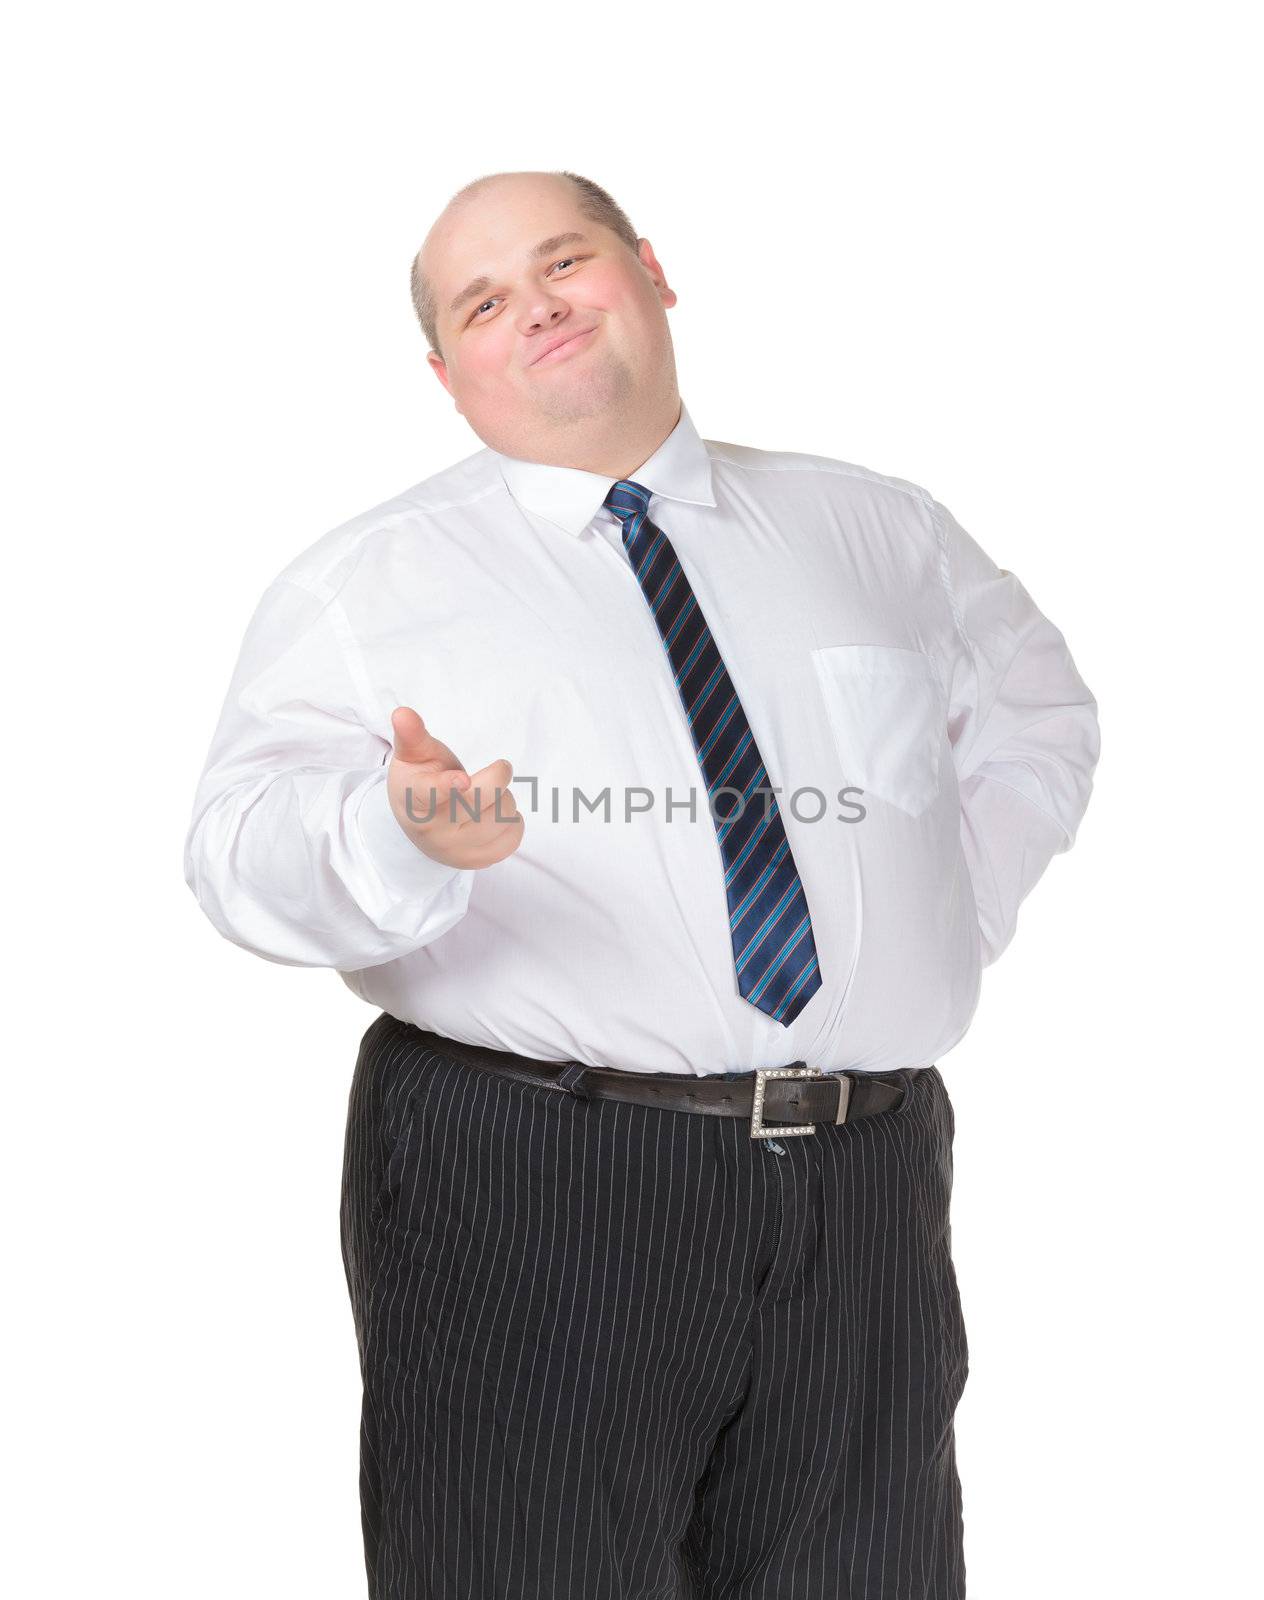 Obese businessman in a shirt and tie making gesturing, isolated on white